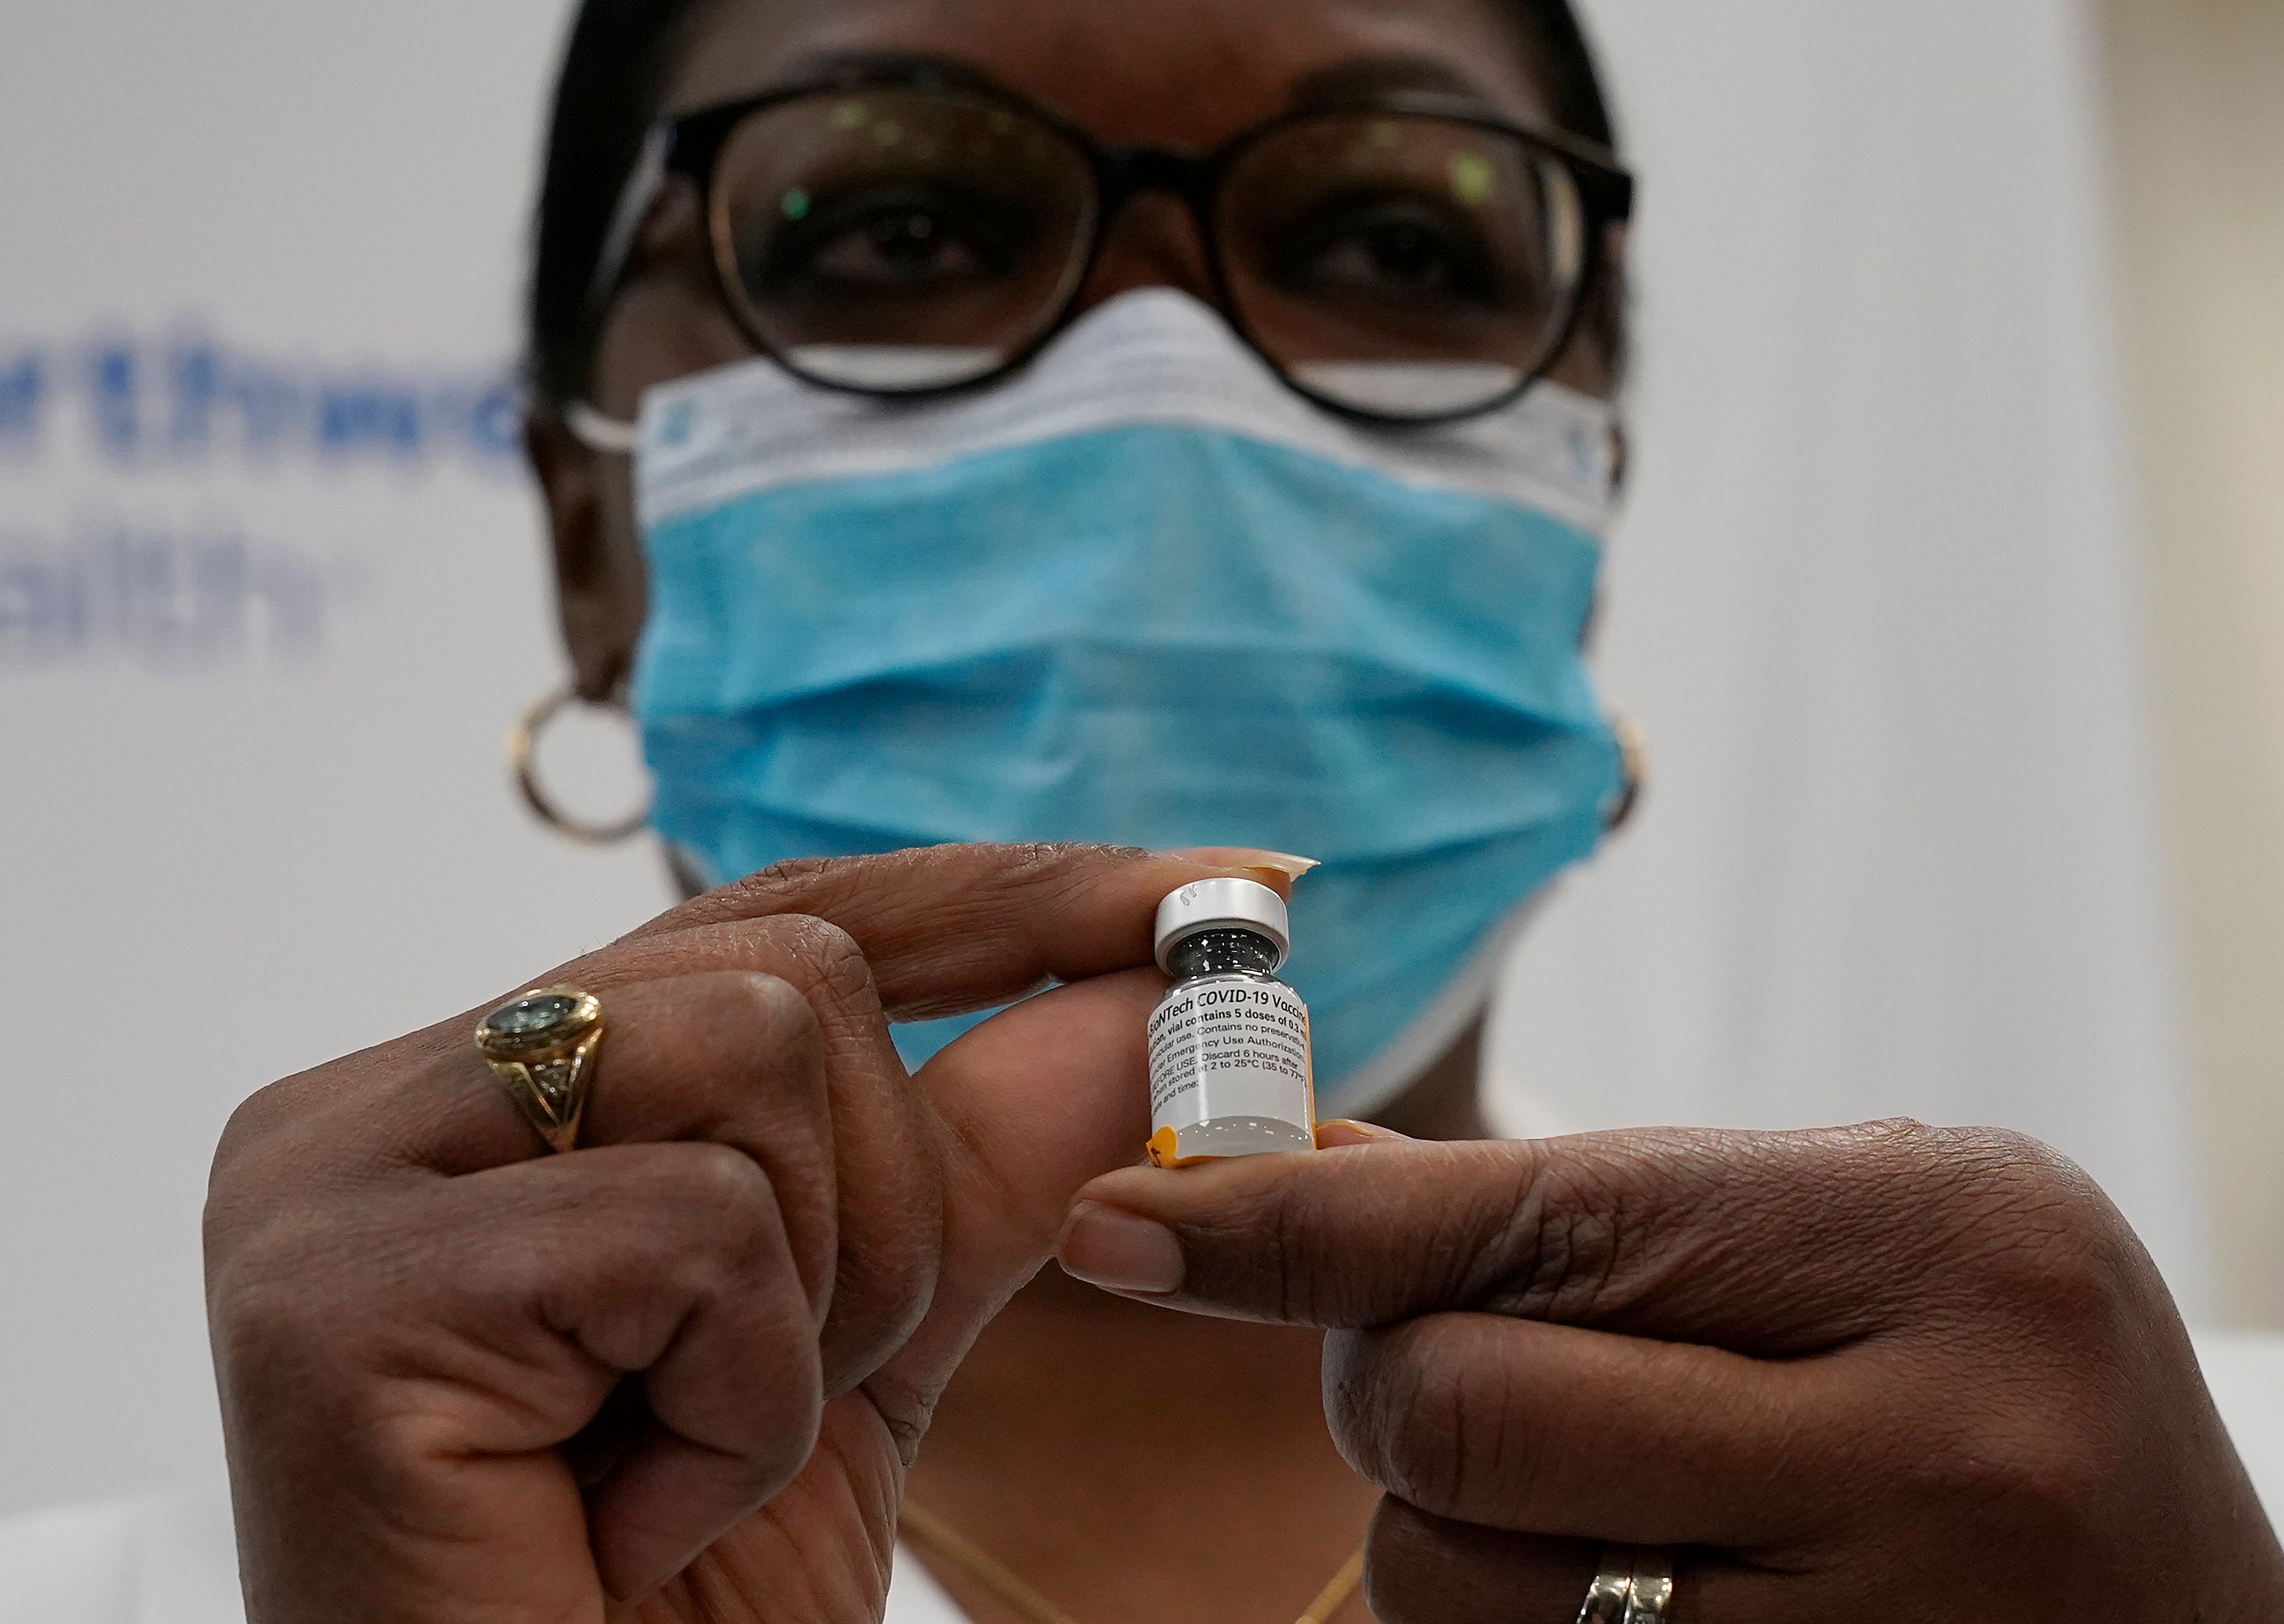 The Pfizer vaccine. Photo: Timothy A. Clary/AFP via Getty Images